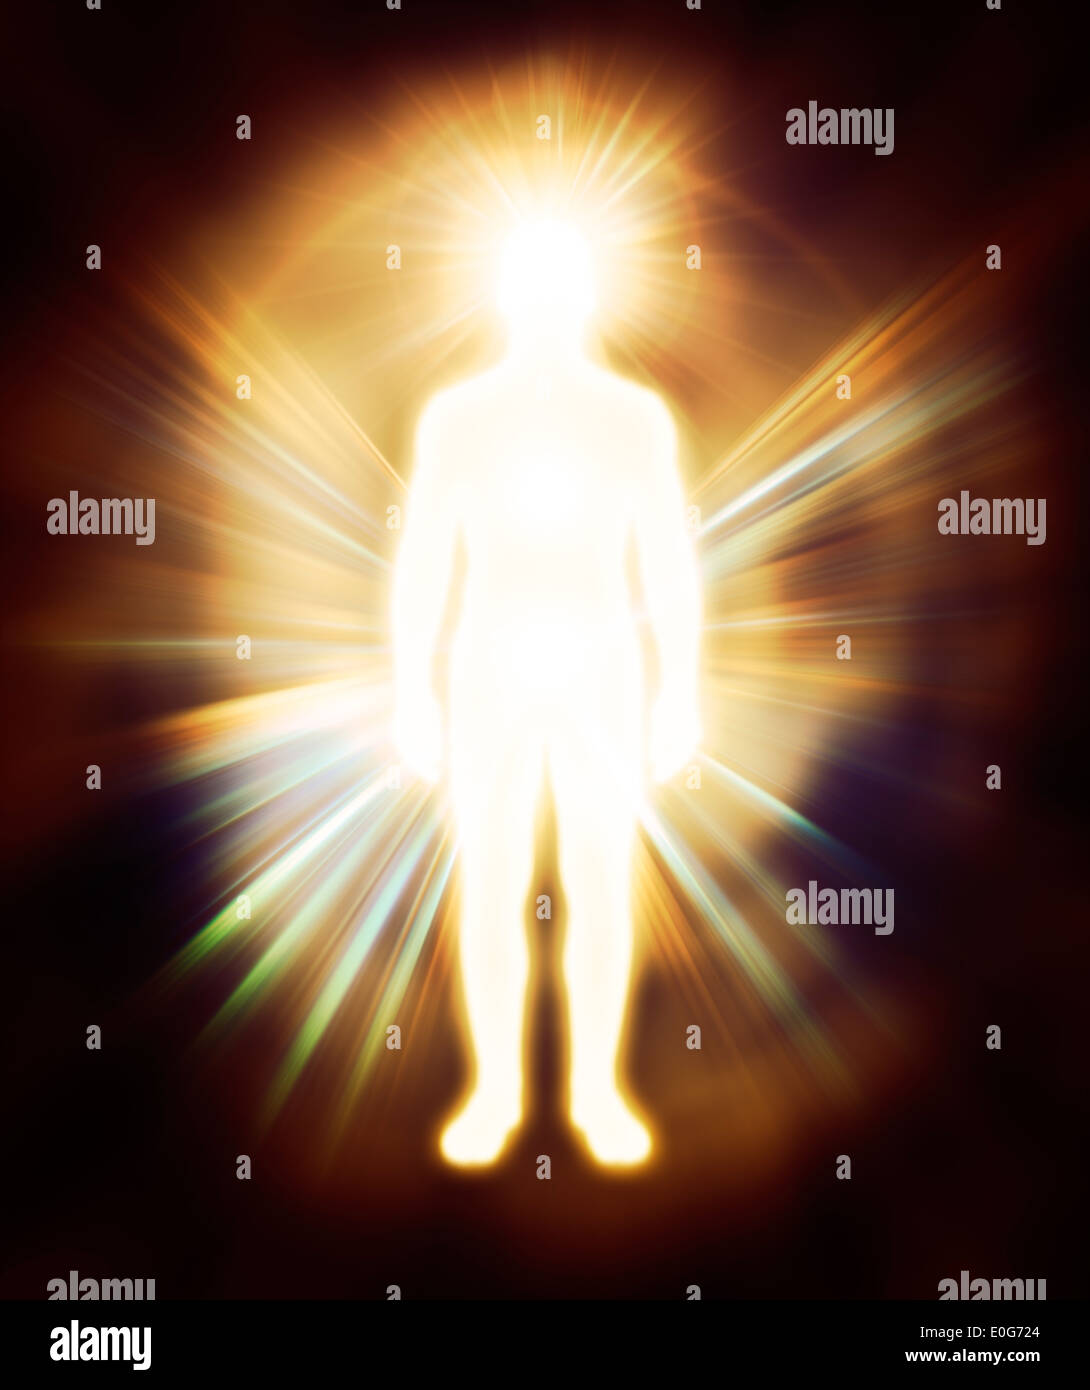 License available at MaximImages.com - Glowing human energy body Qi energy  emanations. Man as luminous being, aura, spiritual concept Stock Photo -  Alamy